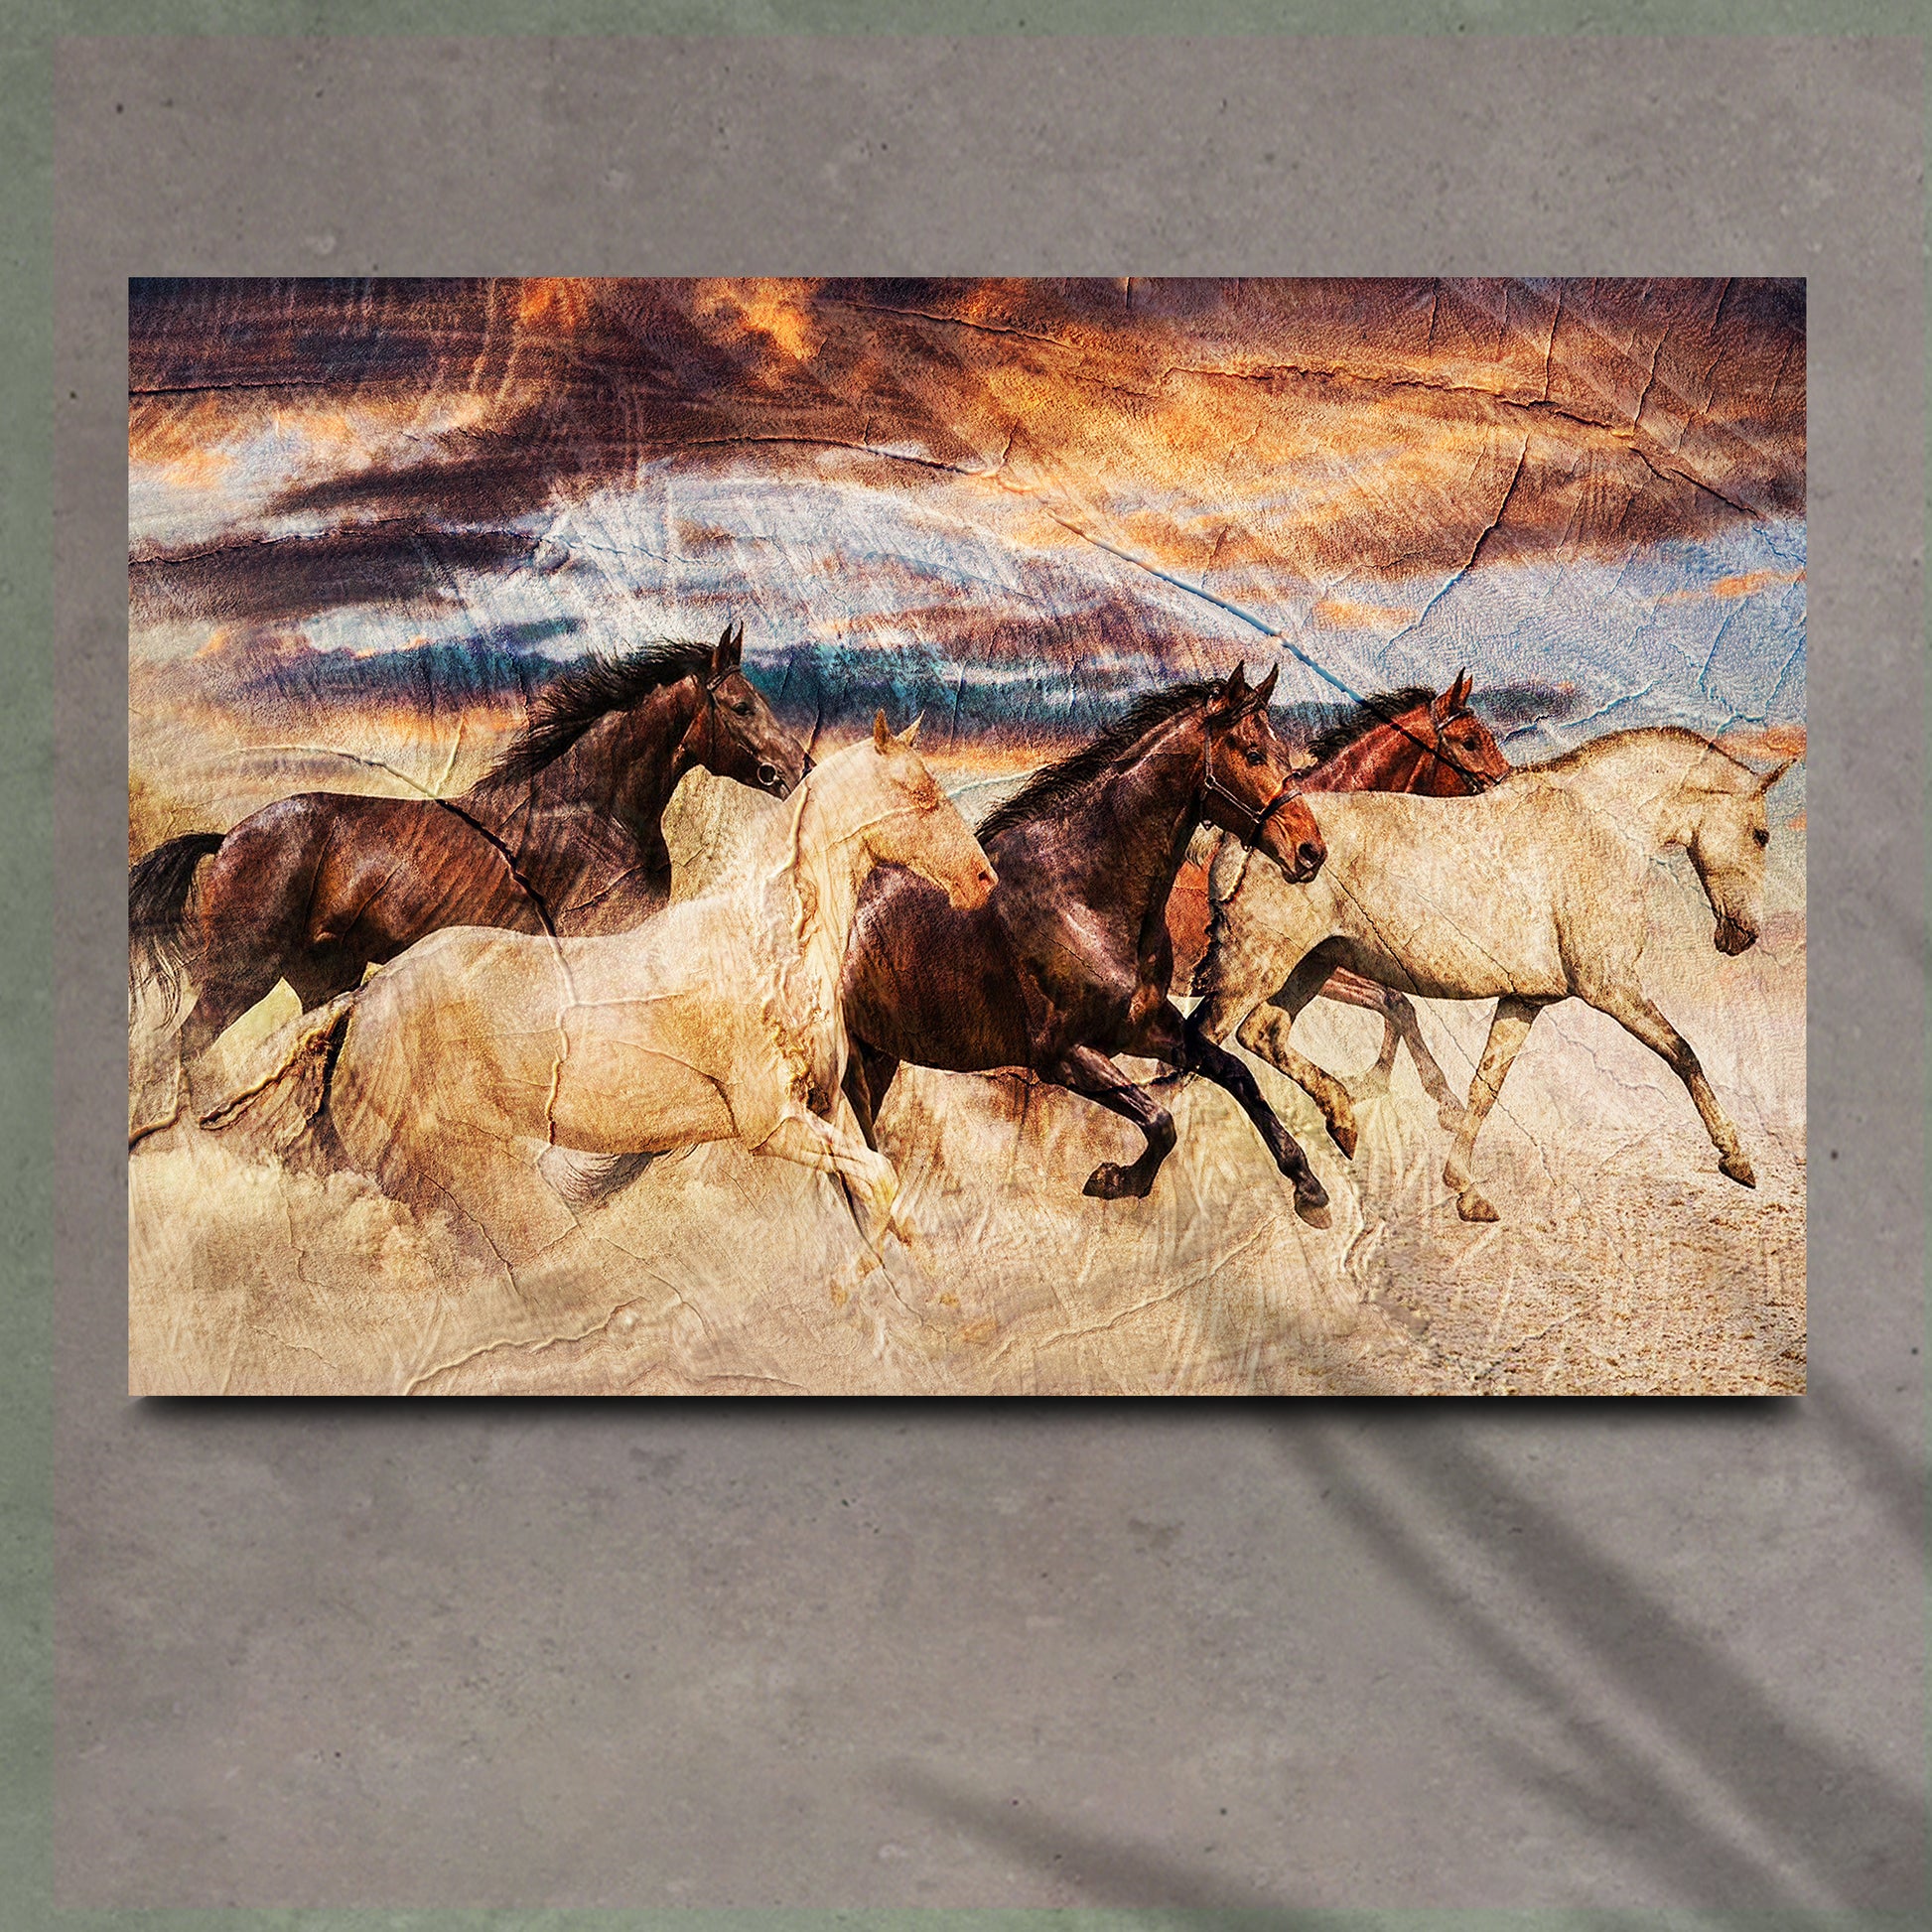 Galloping Horses Canvas Wall Art - Image by Tailored Canvases